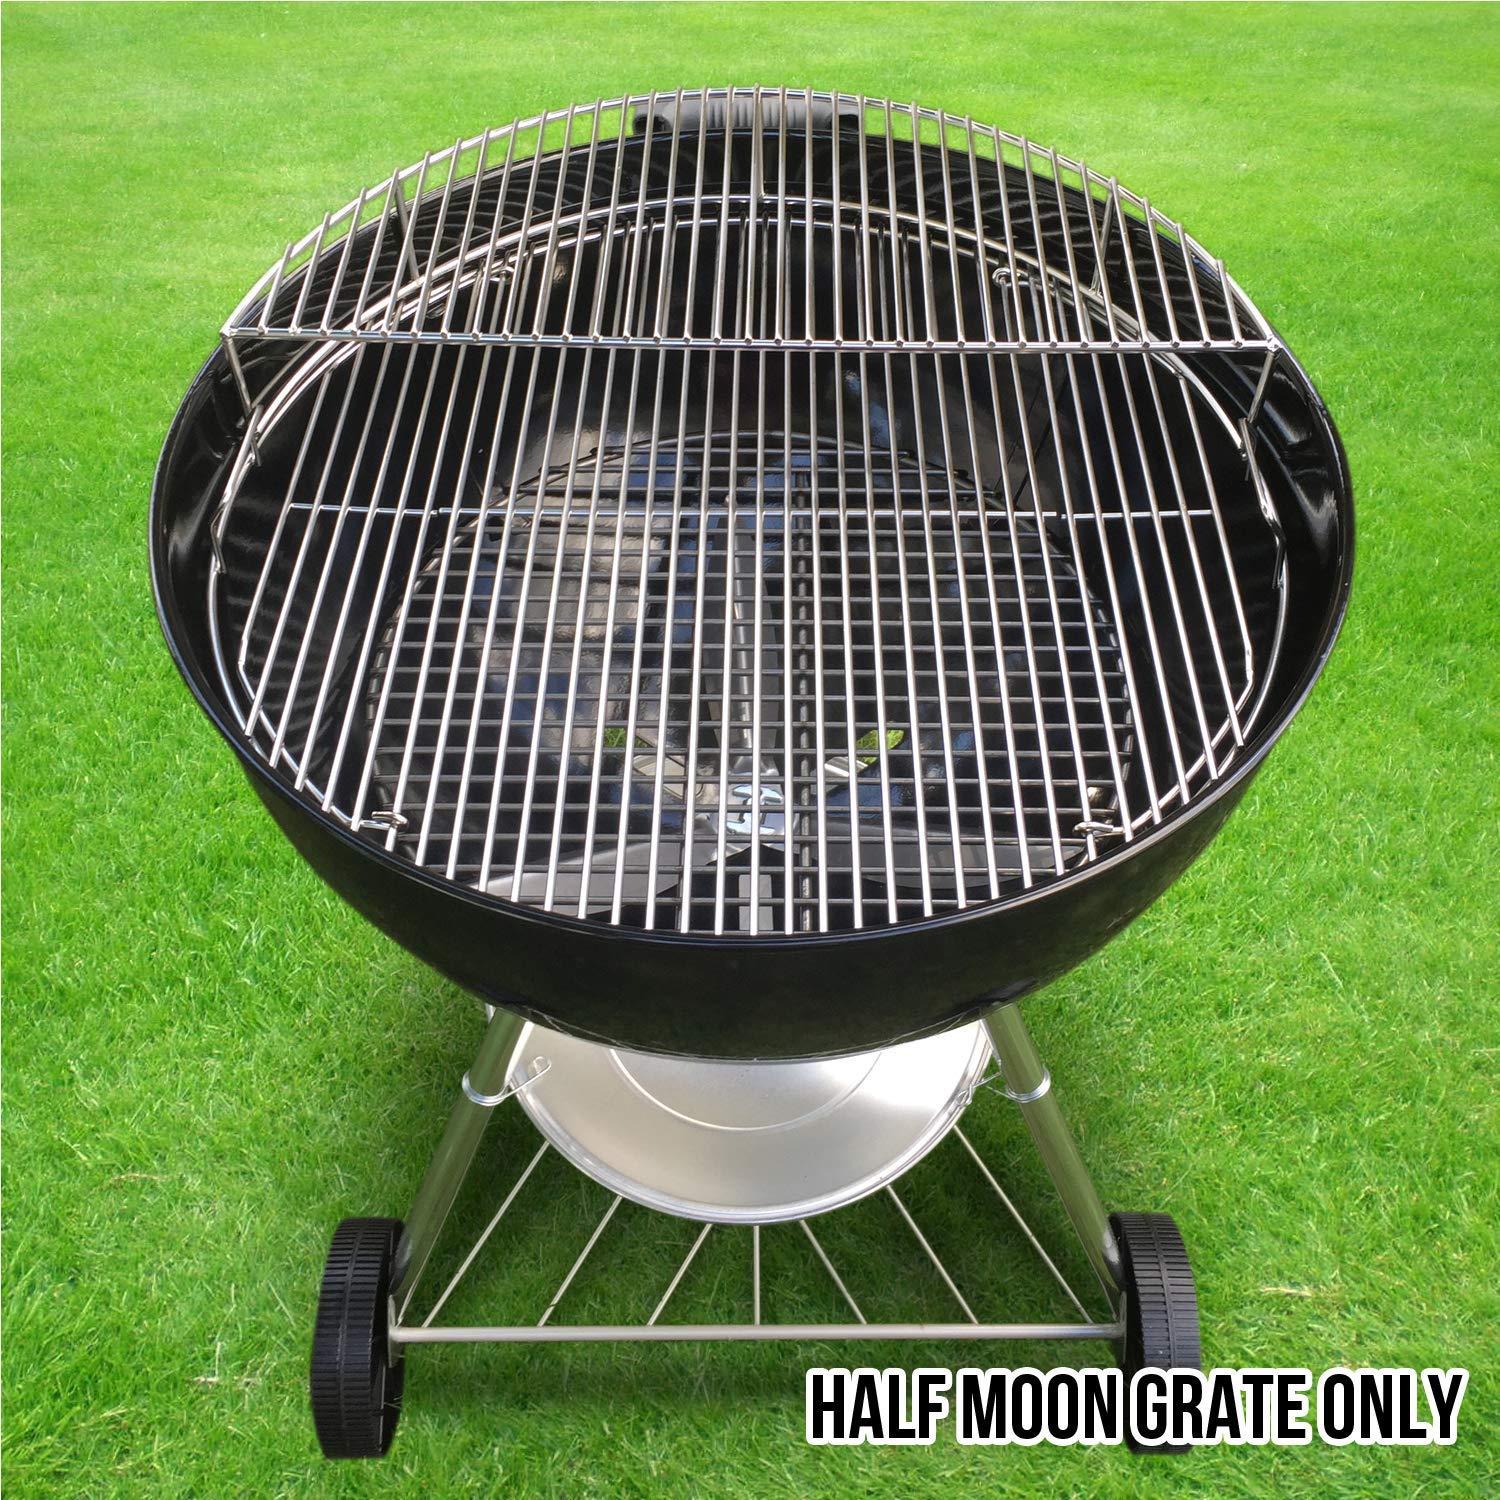 The Original 'Upper Deck' Stainless Steel Grilling Rack/Warming Rack/Smoking Rack/Charcoal Grill Grate- Use with Weber 22 inch Kettle Grill- Charcoal Grilling Accessories and Grill Tools Grill Rack? - image 2 of 6